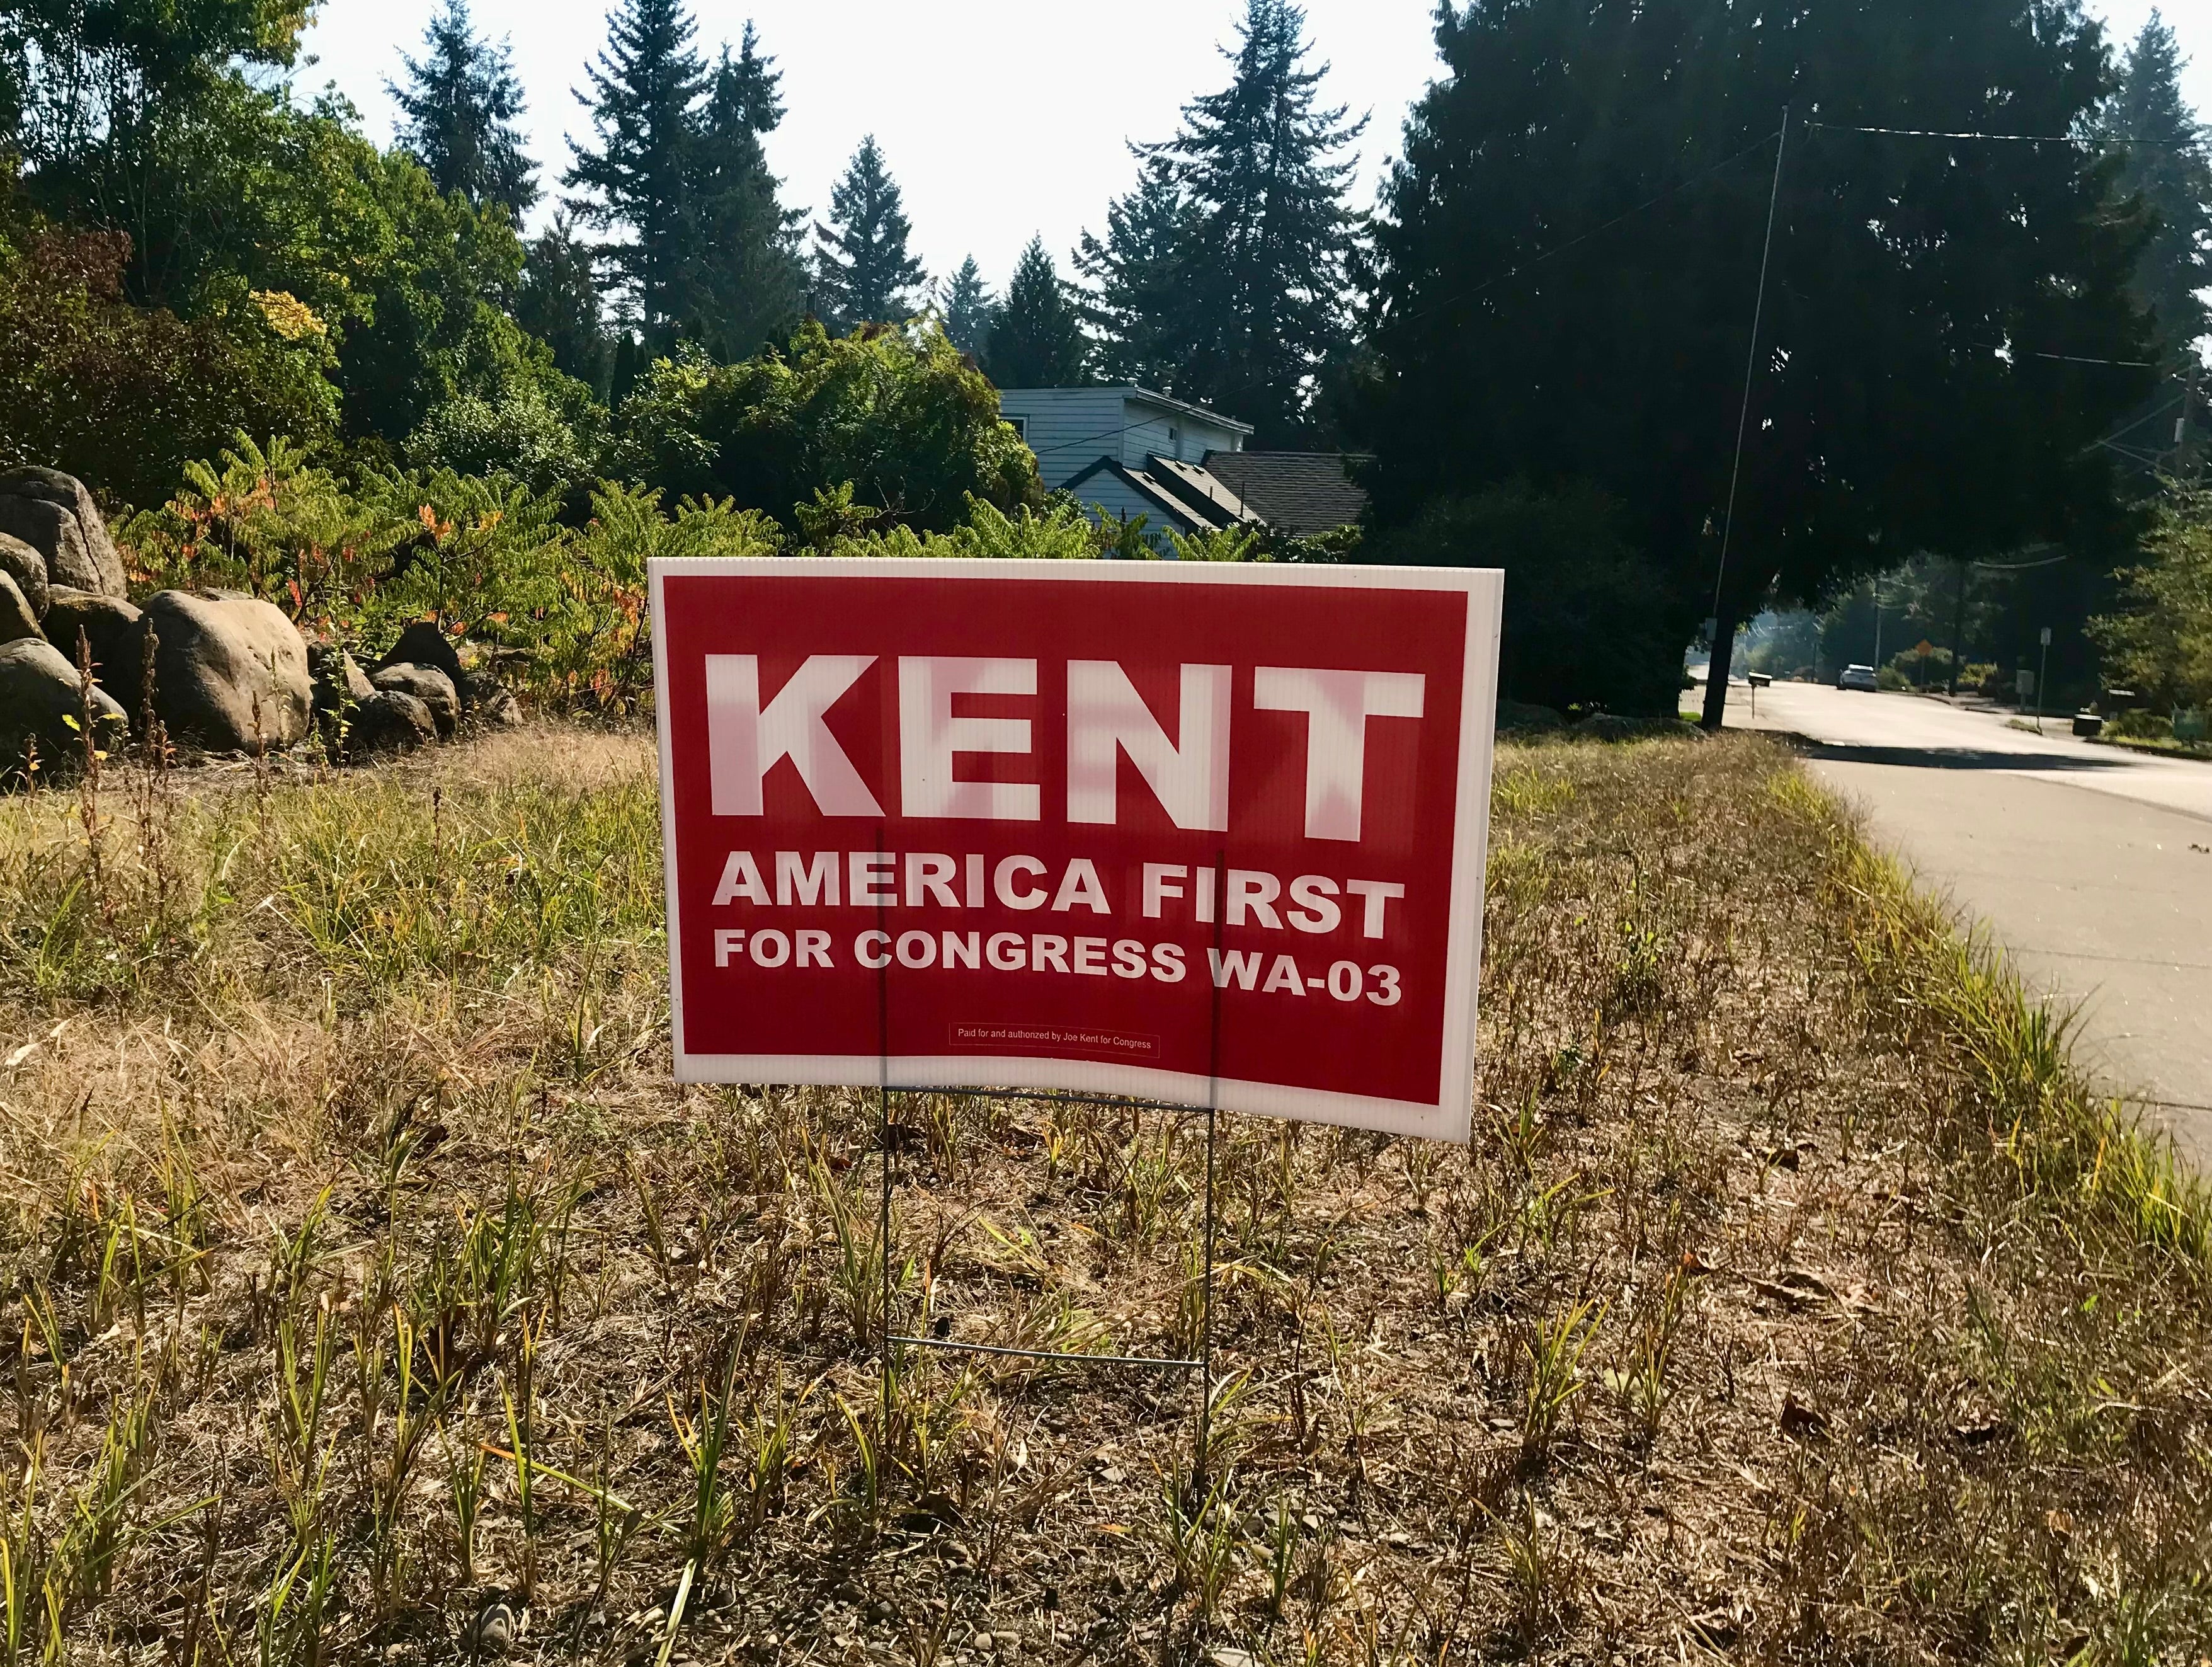 Polls suggest Joe Kent is starting with much higher name recognition than his Democrat opponent